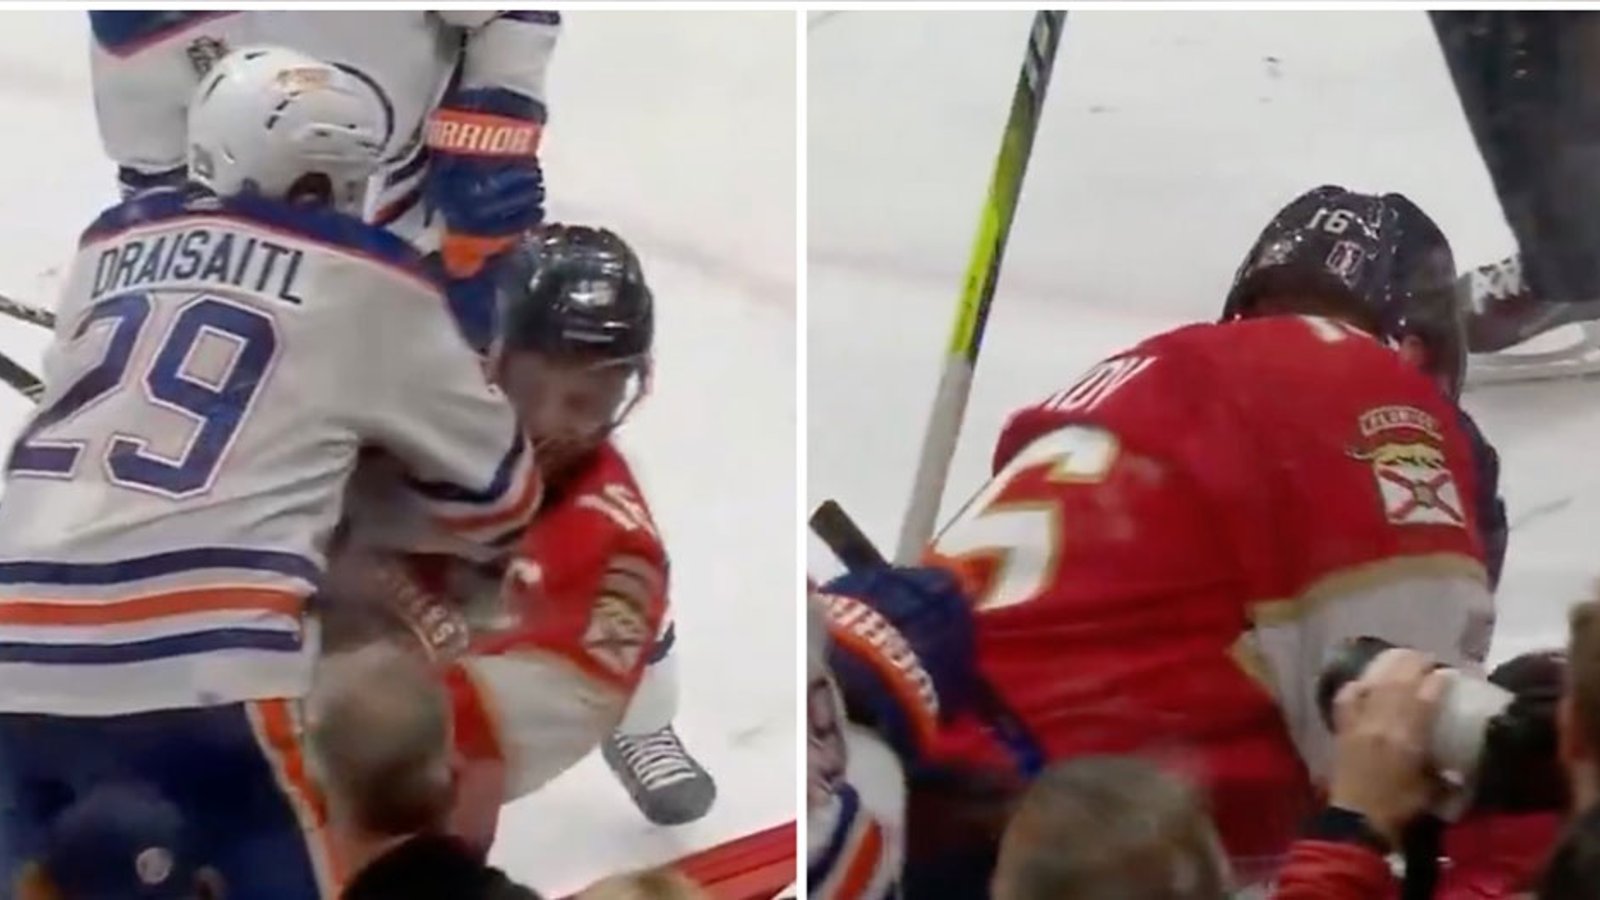 Reports of a possible Draisaitl suspension after hit on Barkov in Game 2